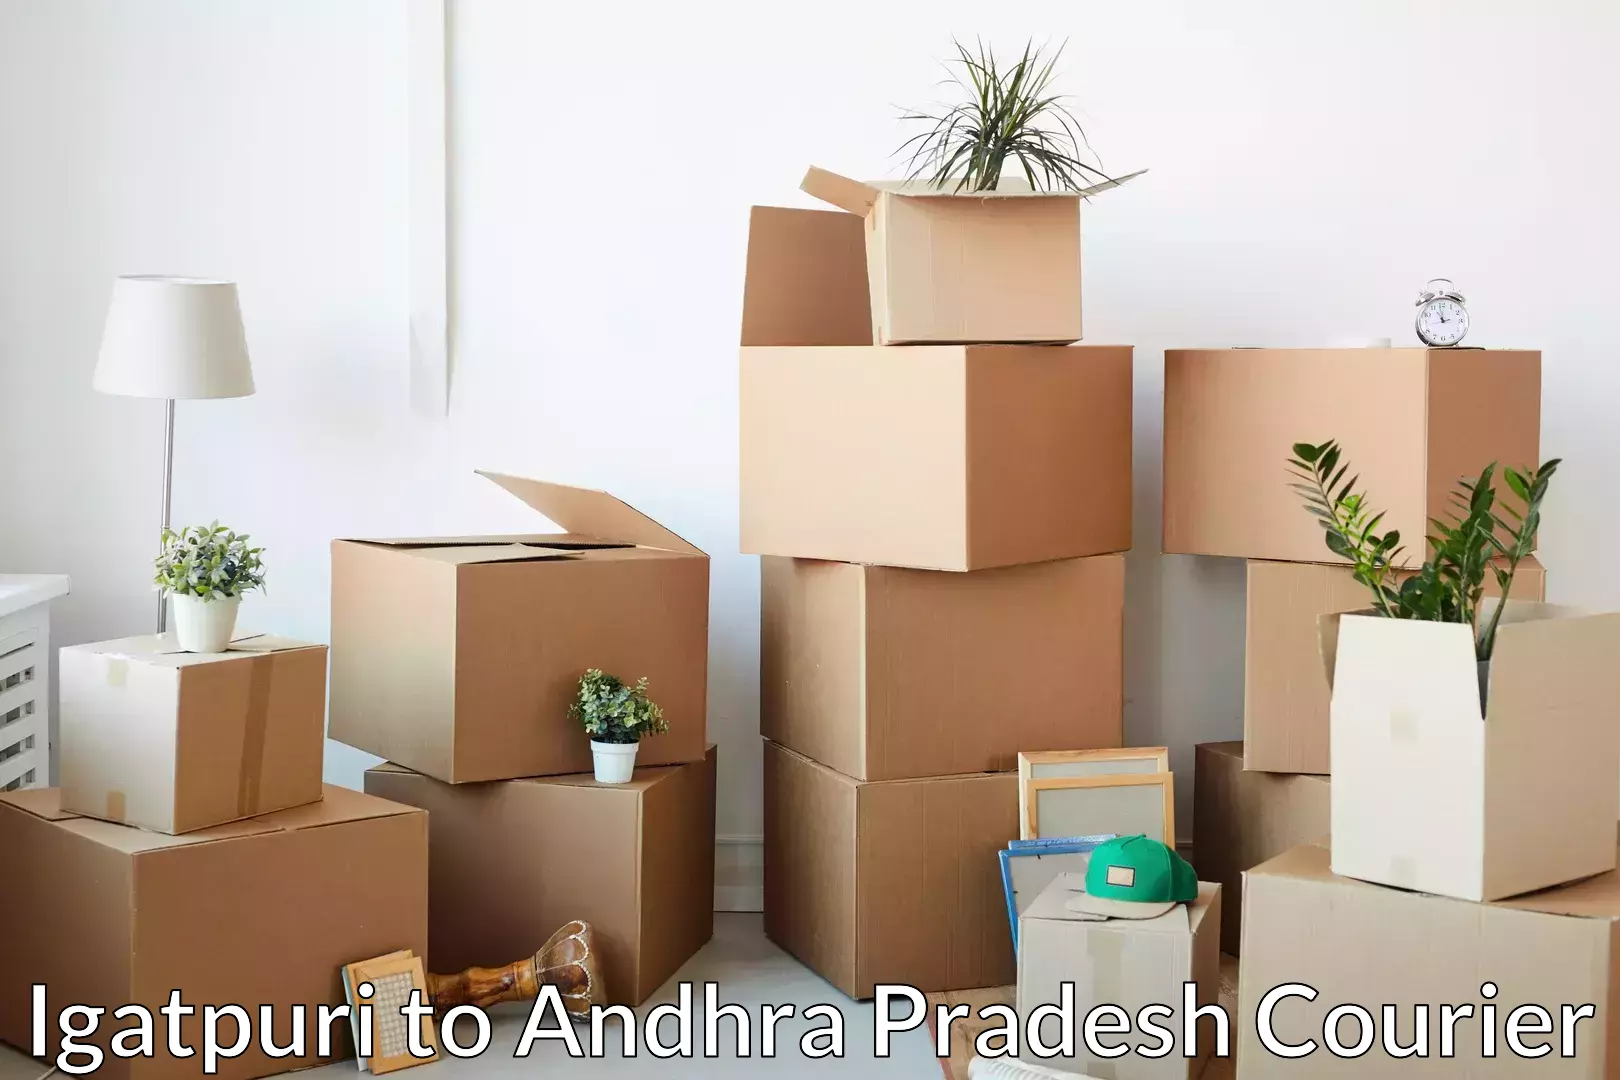 Professional movers and packers in Igatpuri to Visakhapatnam Port